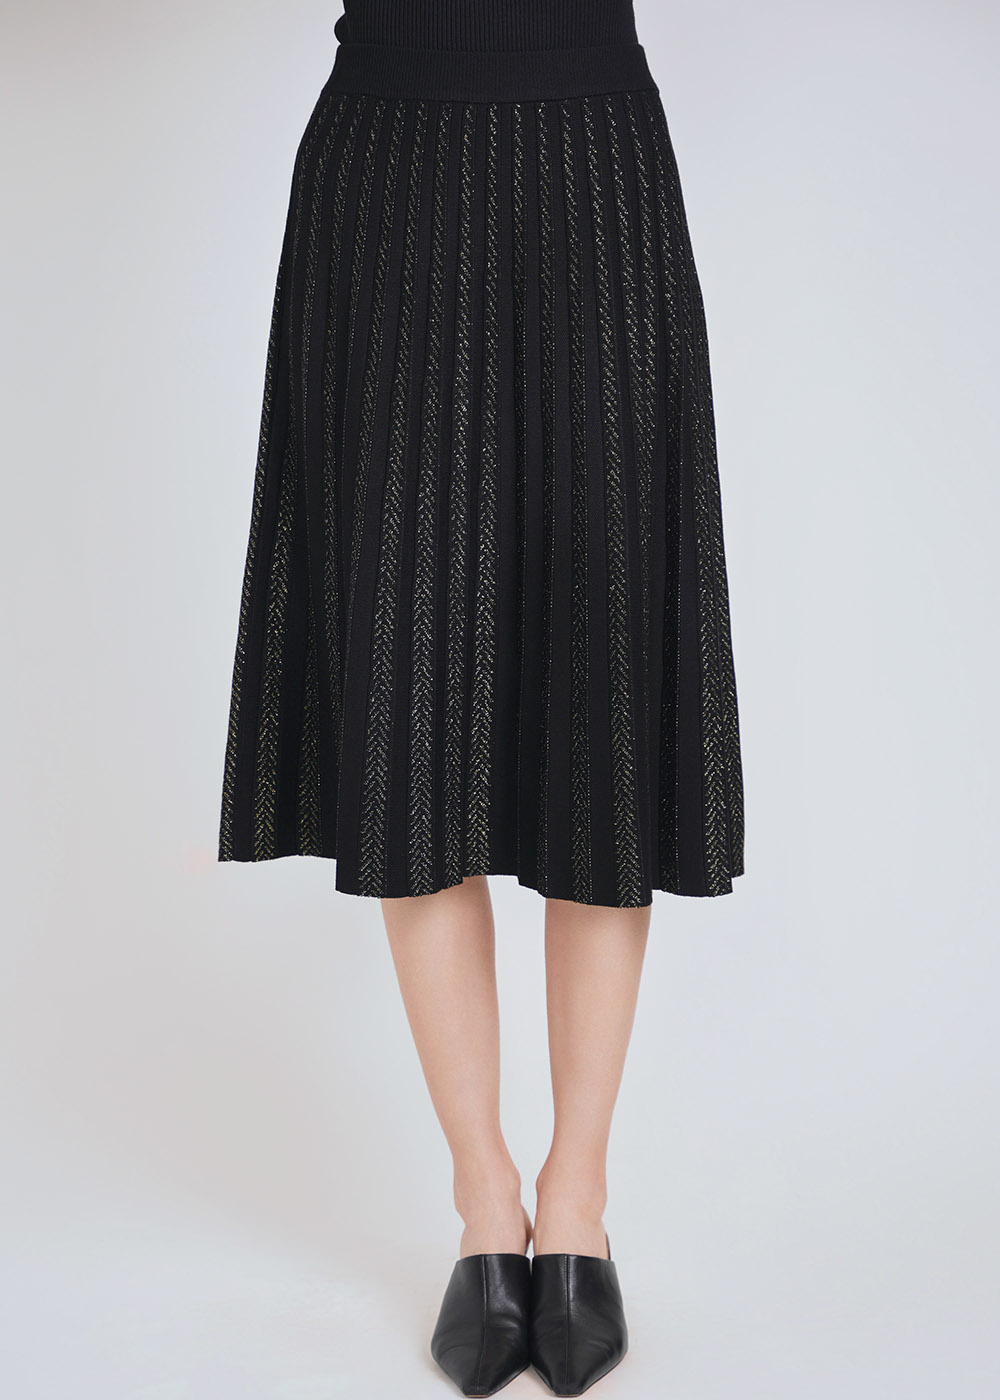 Black Midi Skirt with Gilded Textures